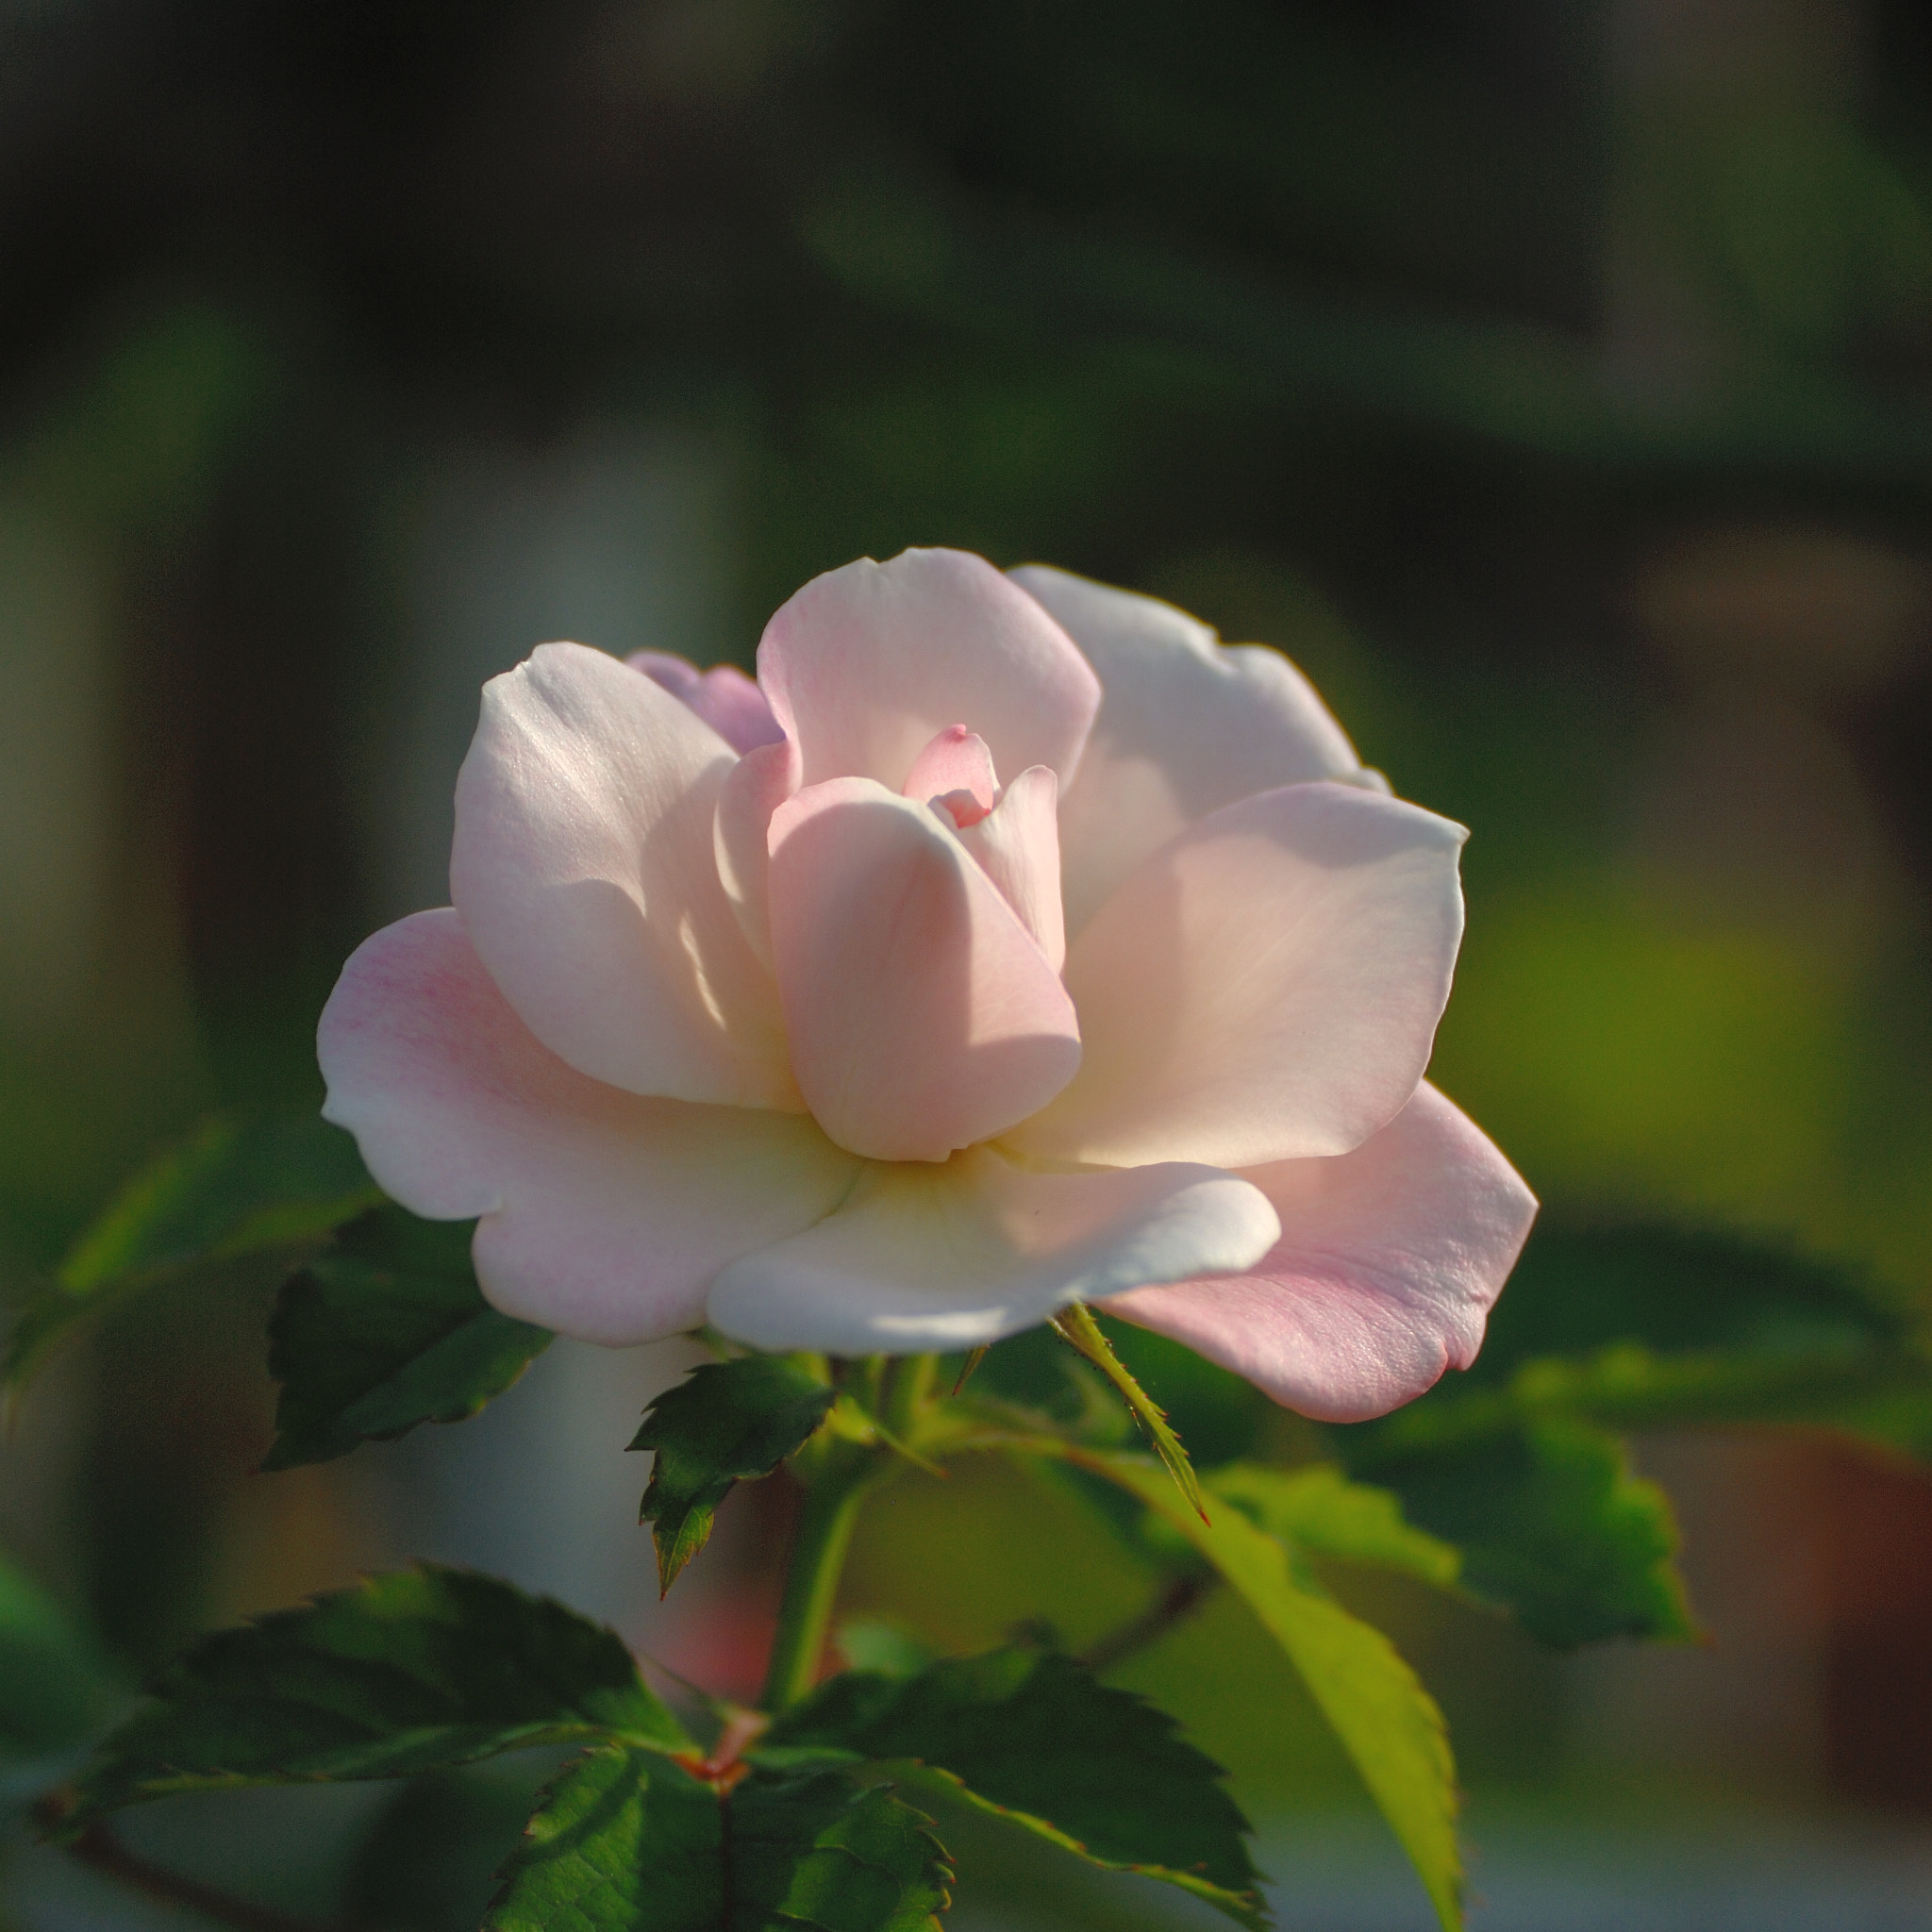 Nikon D200 sample photo. White and pink rose photography